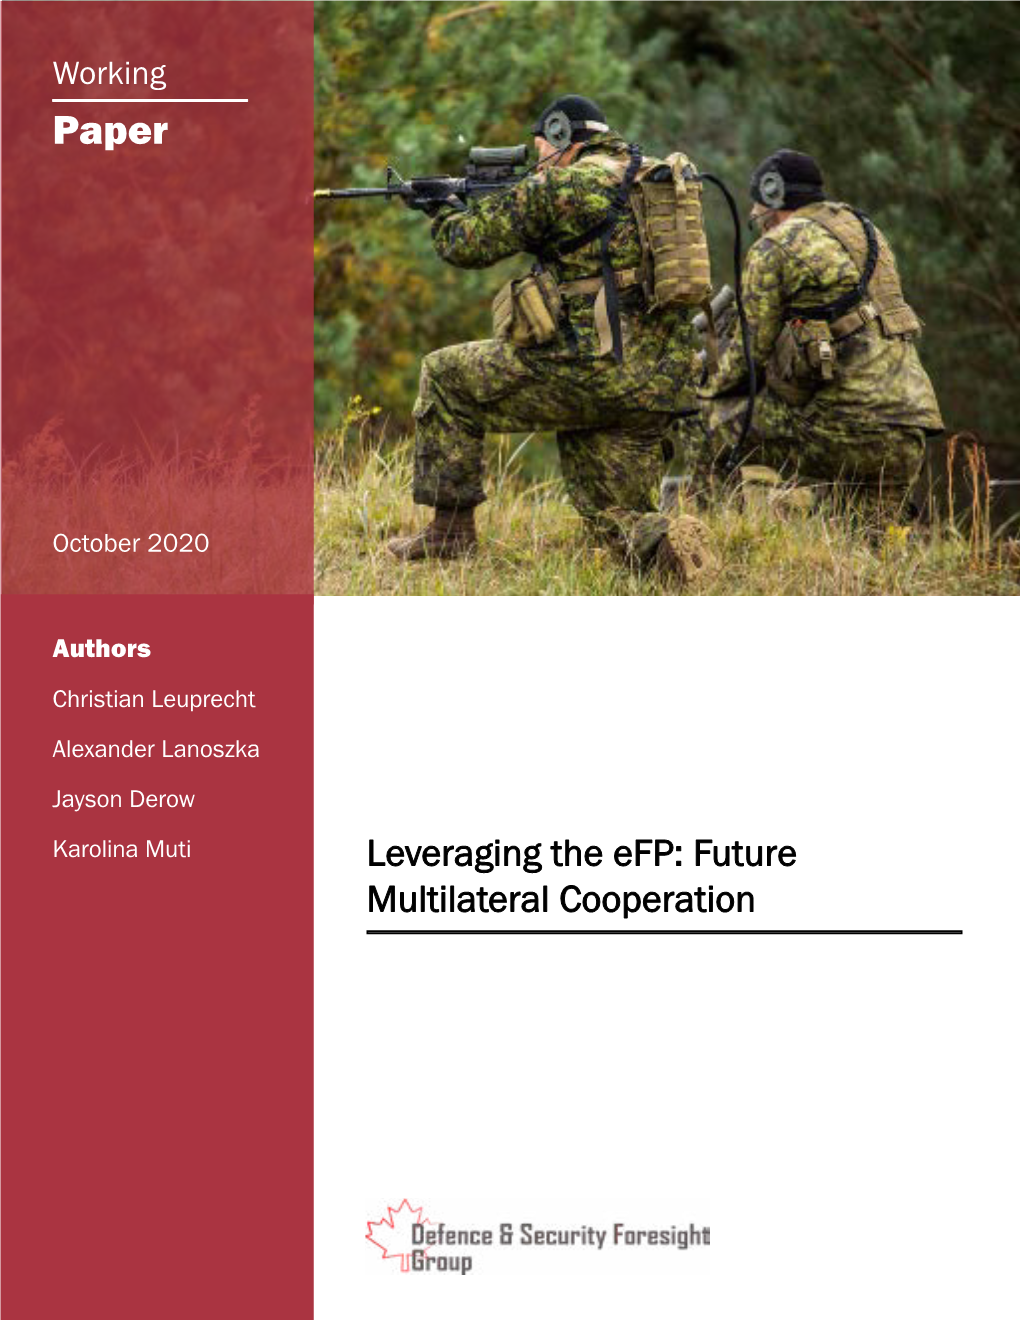 Leveraging the Efp: Future Multilateral Cooperation About the Authors